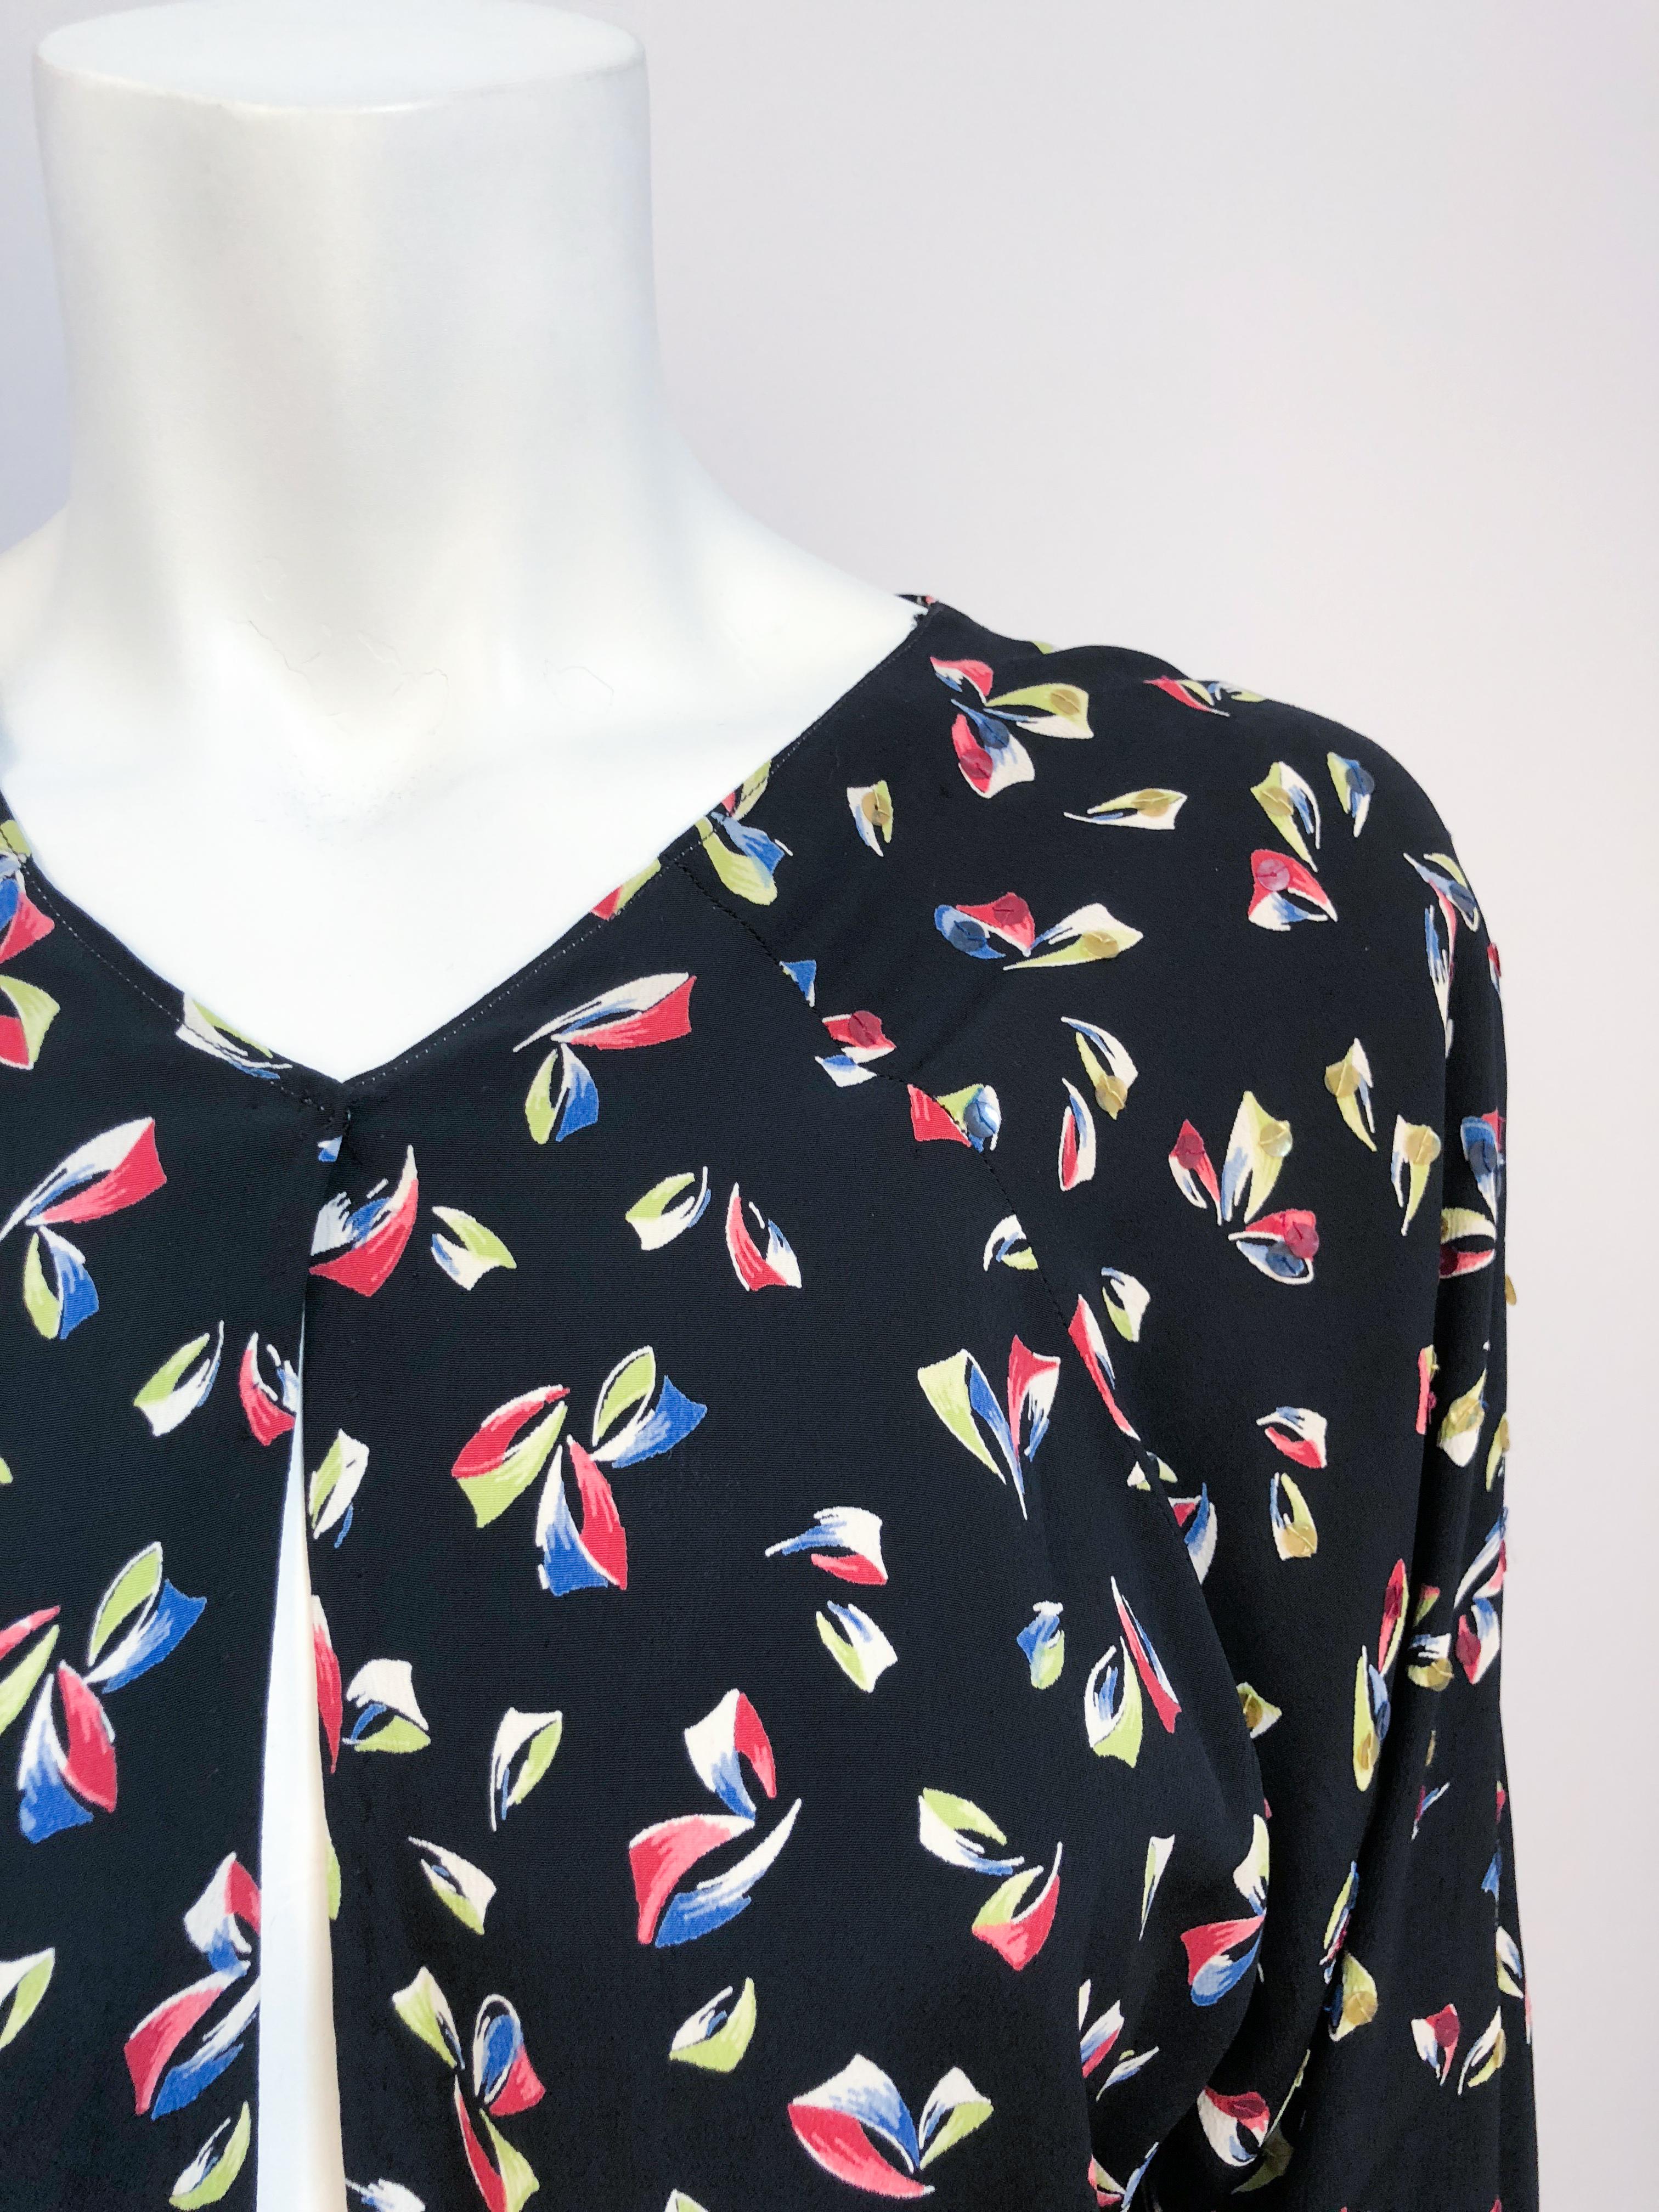 1930s Fantasy Printed top. Black Rayon top with green, red, and blue fantasy print and sequin along the shoulders. A single snap closure at the bottom of the neckline.